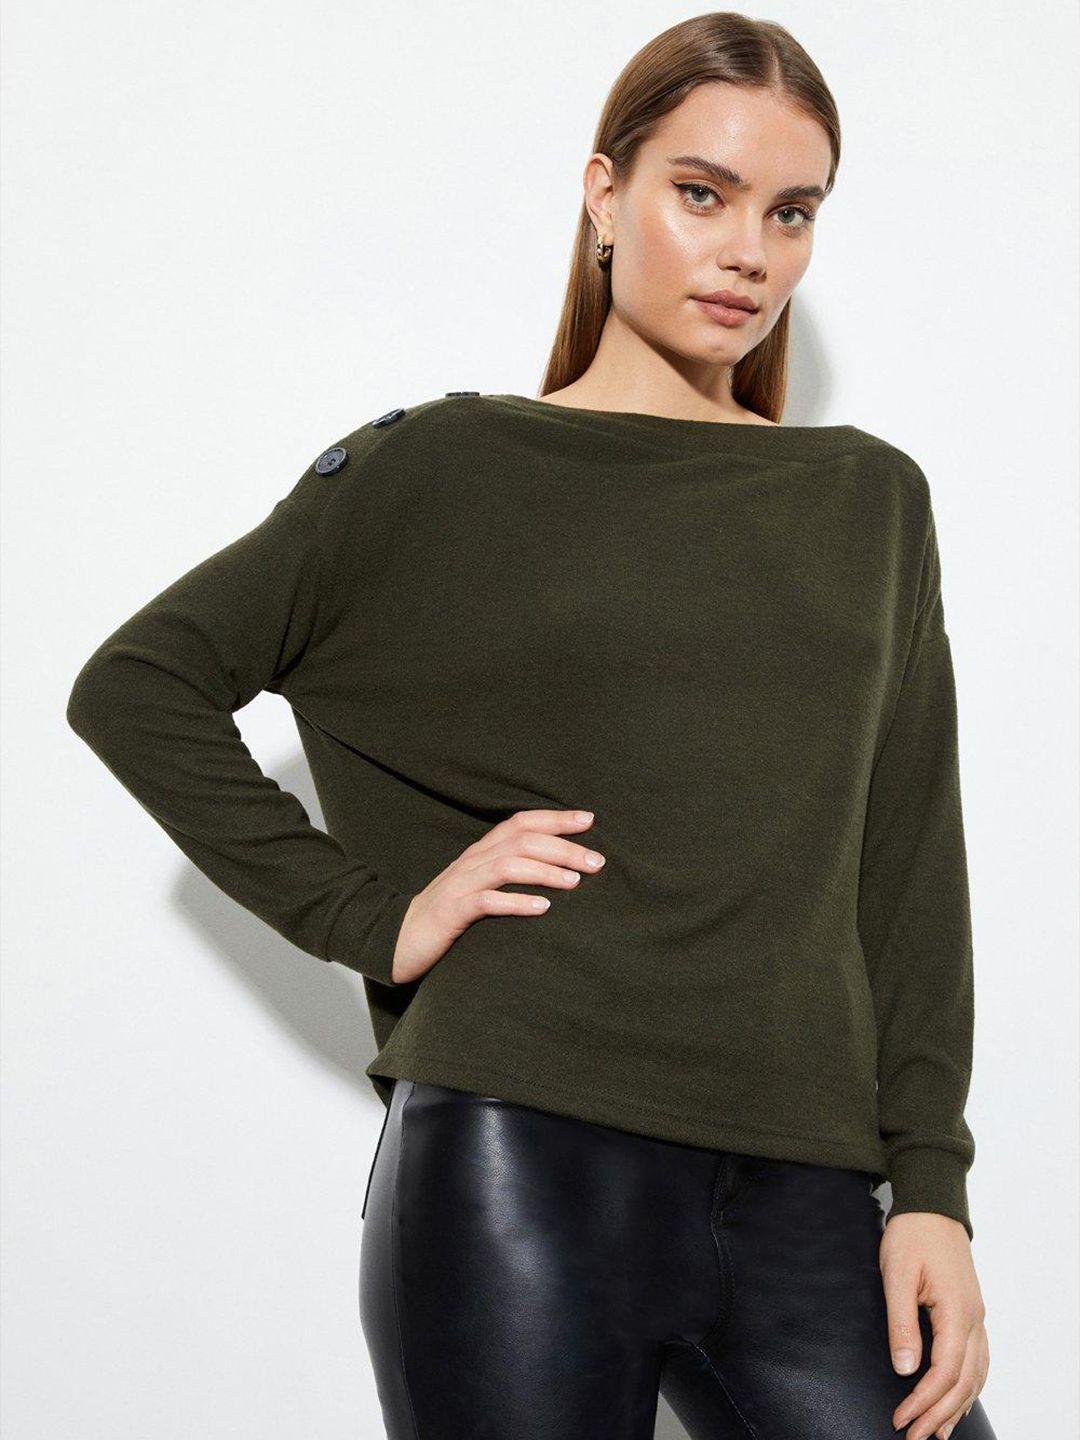 dorothy perkins women olive green button shoulder soft touch batwing pullover